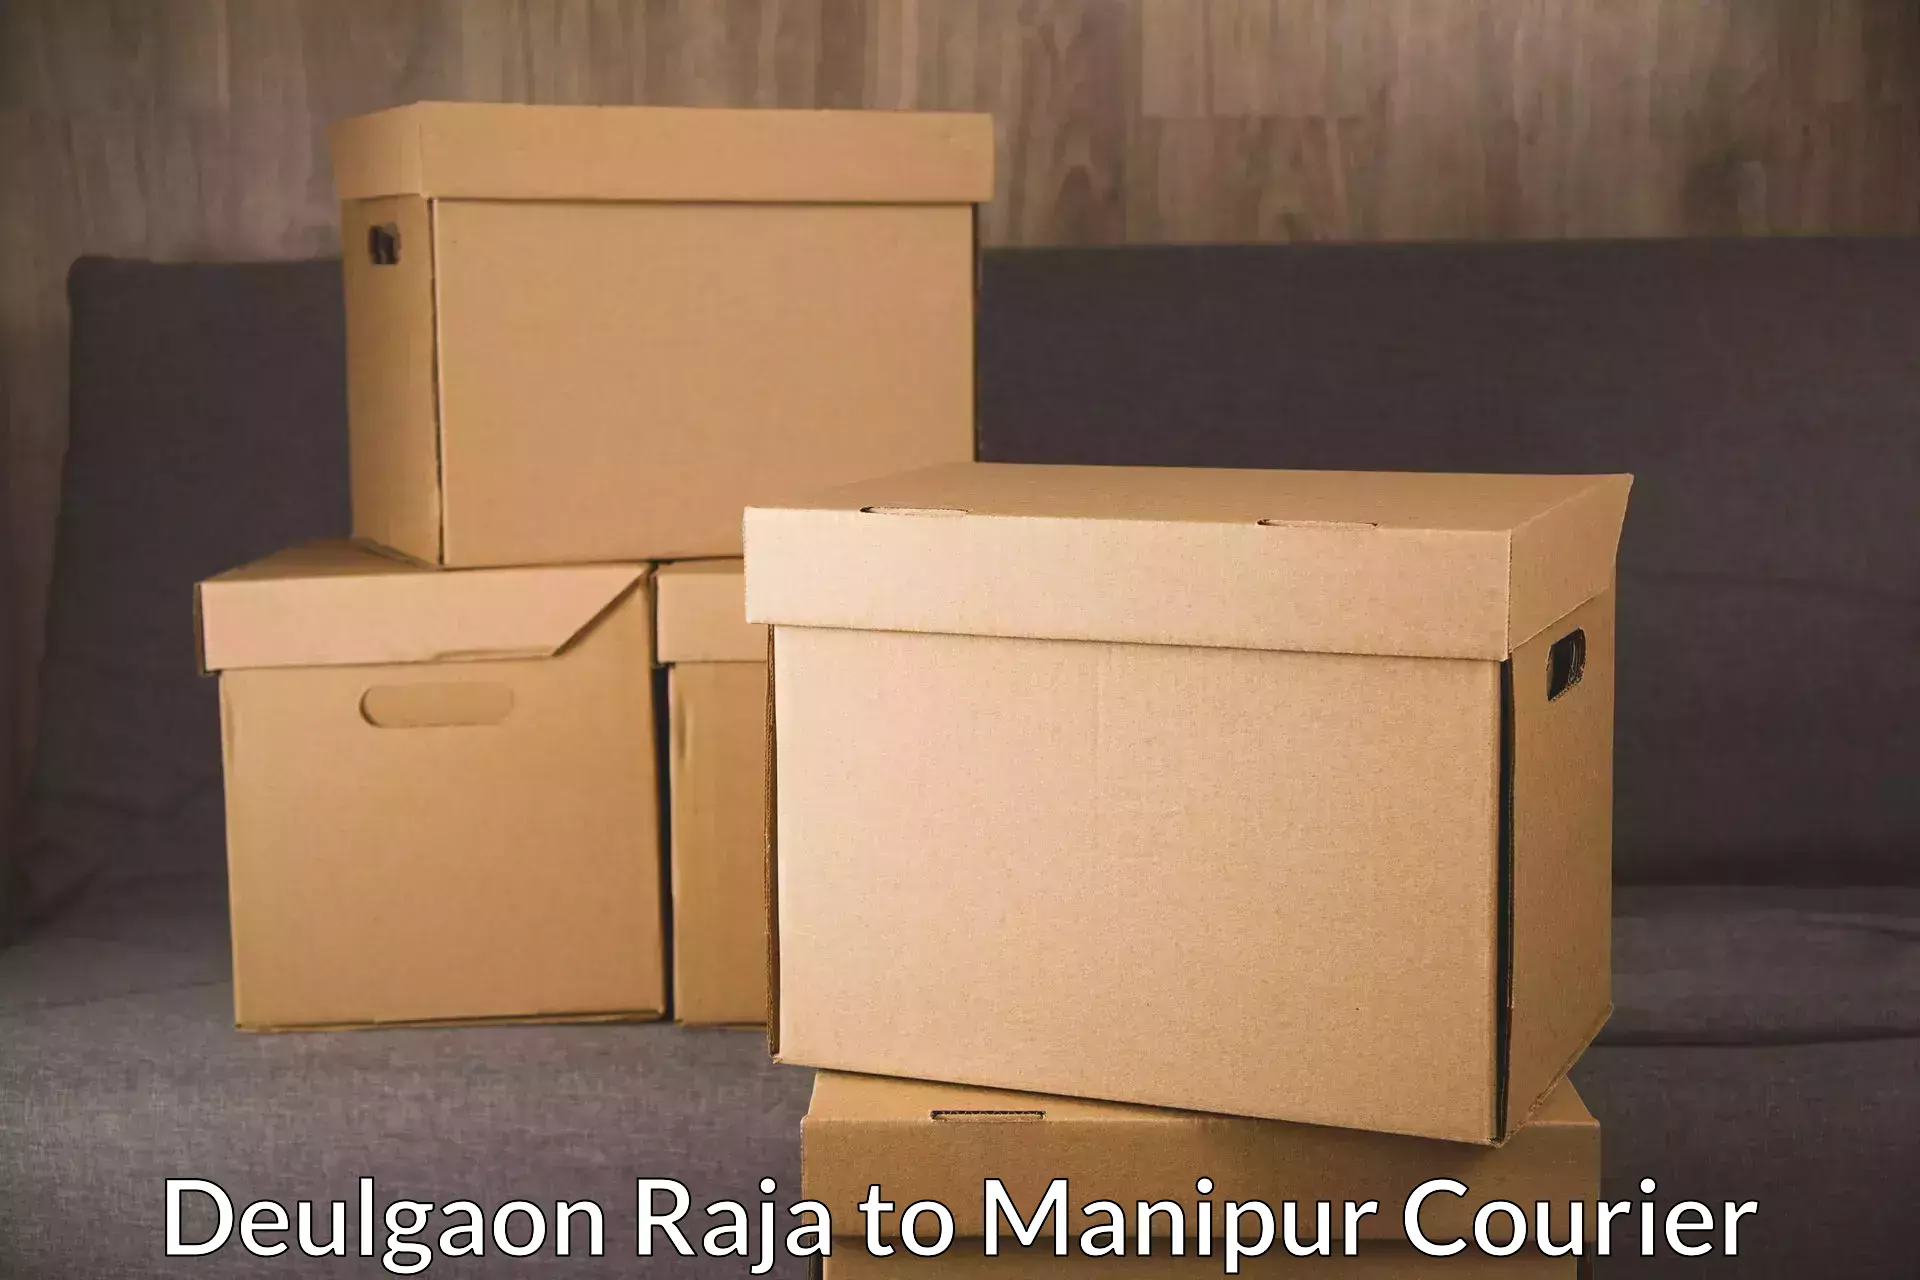 Round-the-clock parcel delivery Deulgaon Raja to Manipur